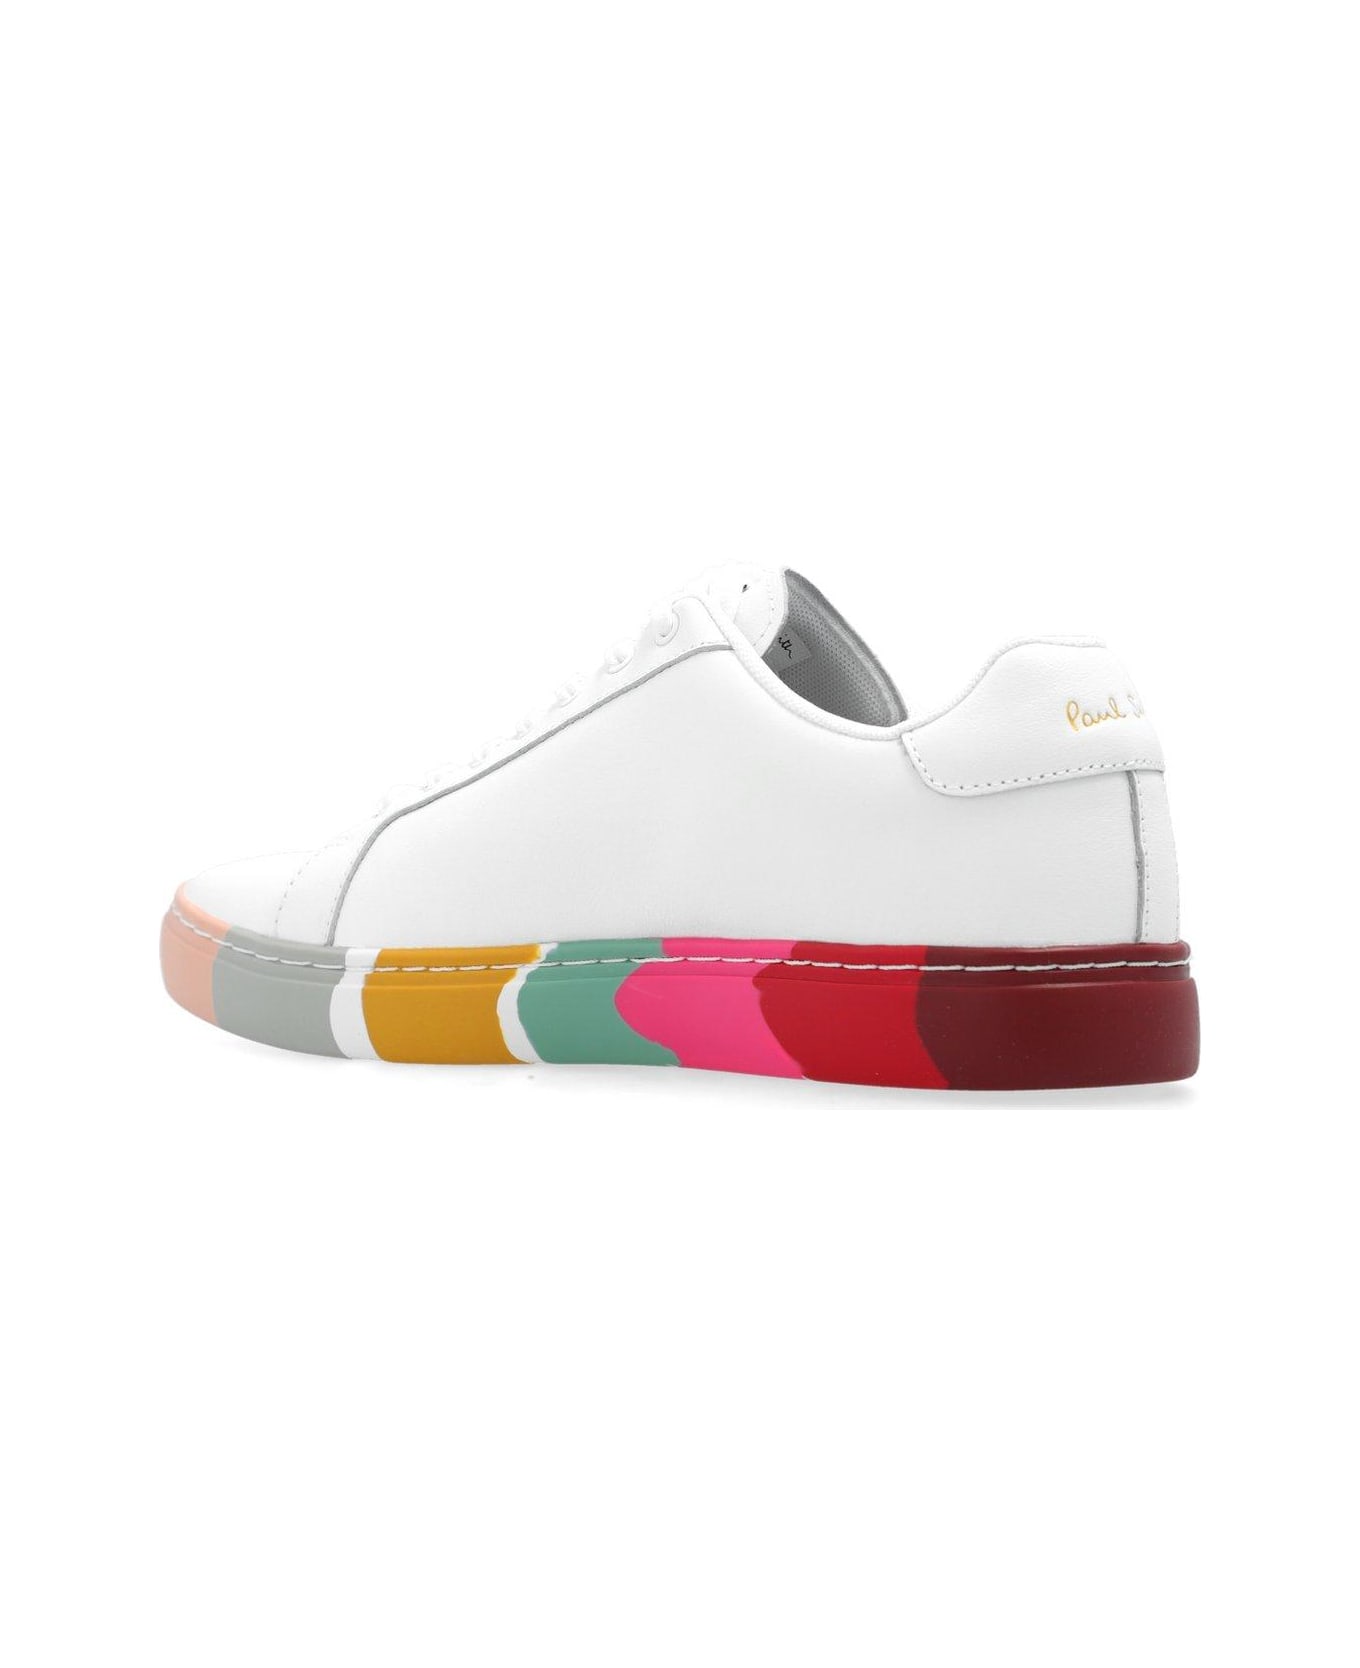 Paul Smith Lapin Sneakers - White スニーカー